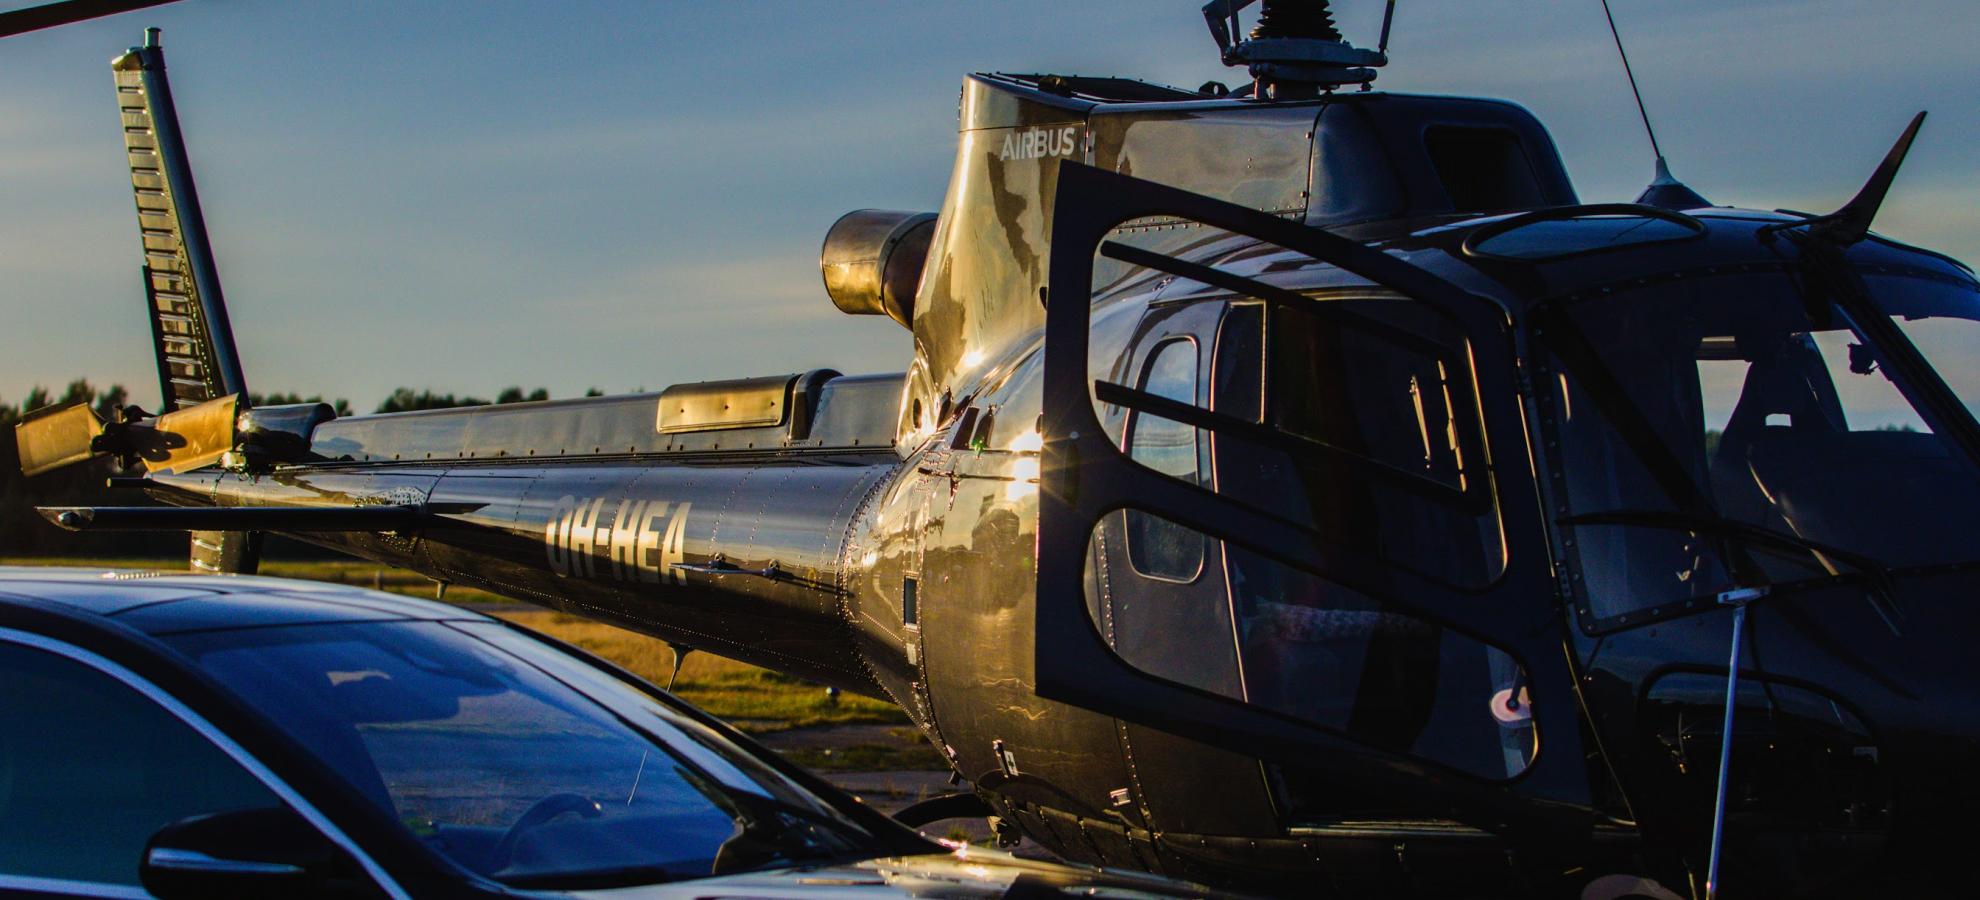 Convenient limo service available on Helsinki Citycopter flights